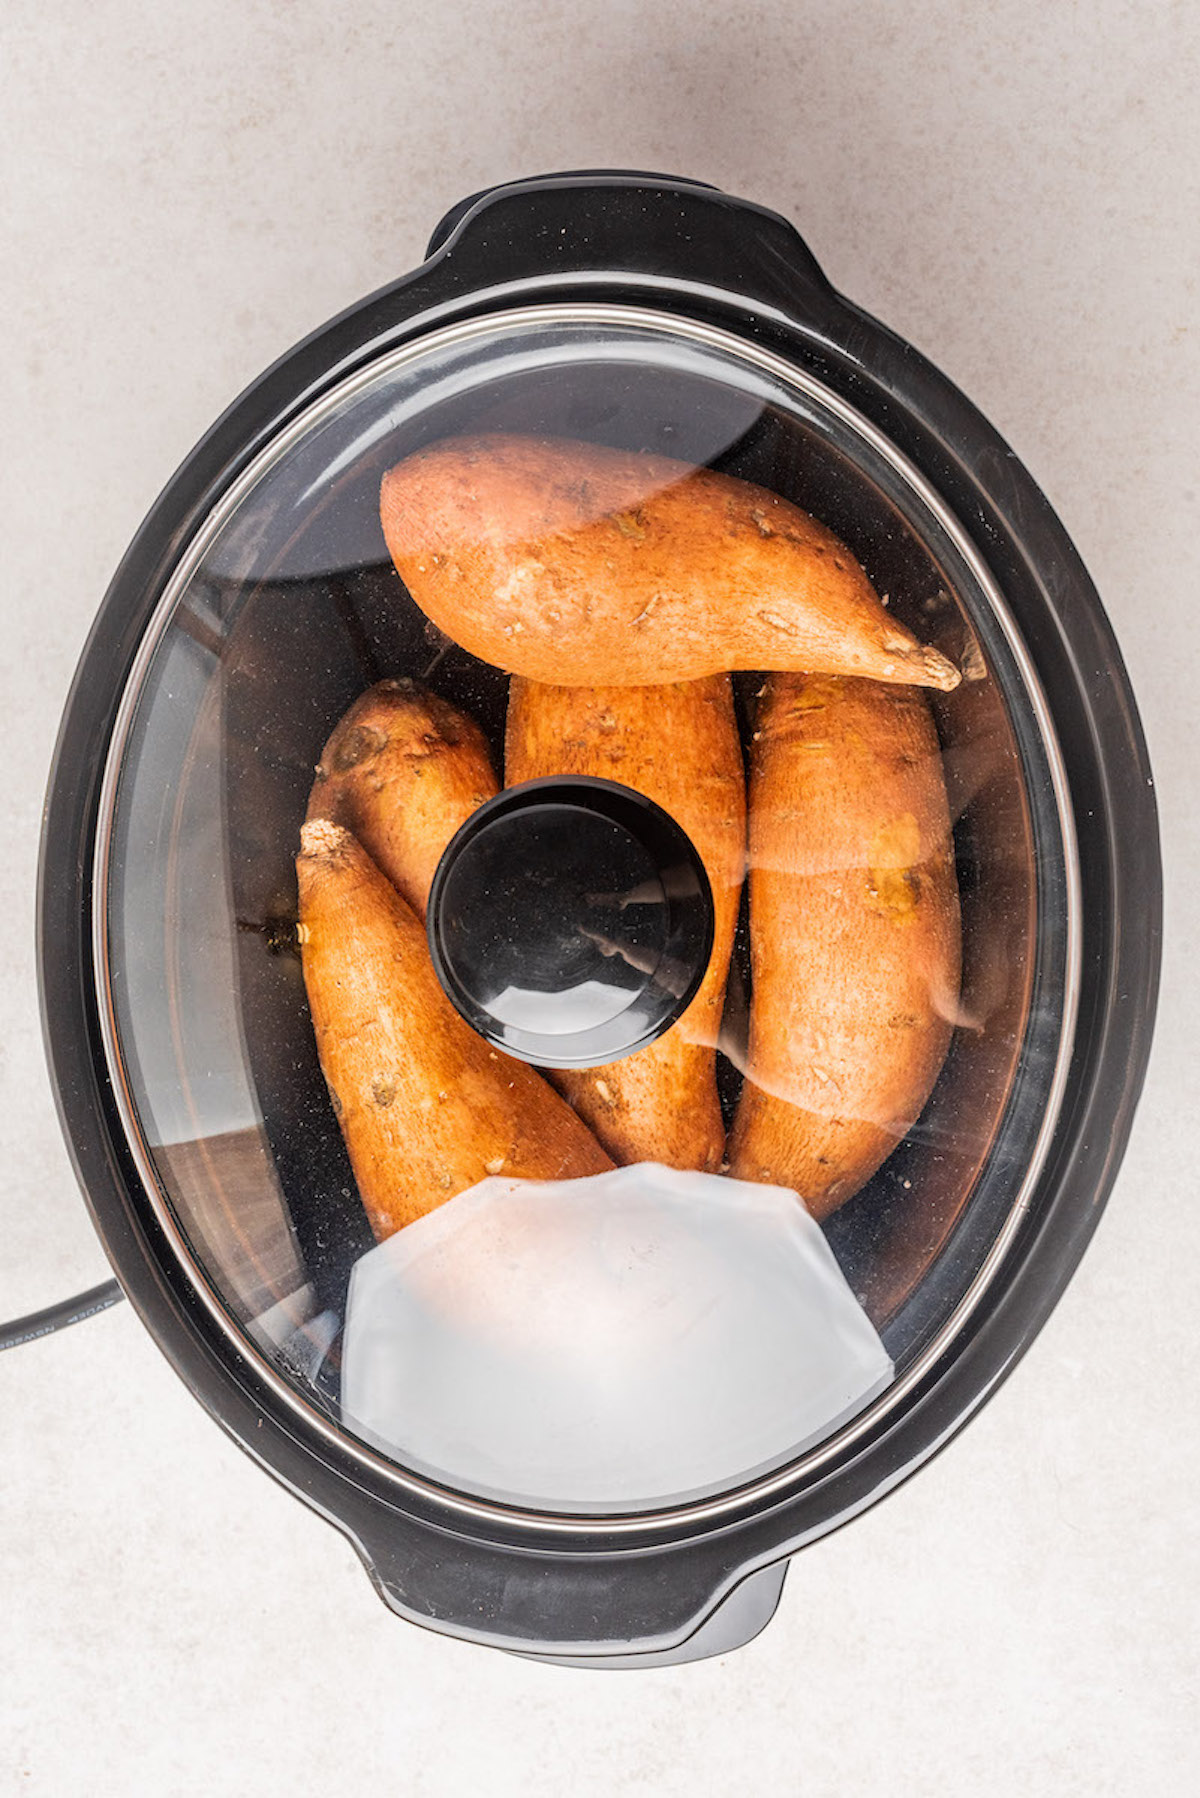 sweet potatoes inside the crockpot with the lid on